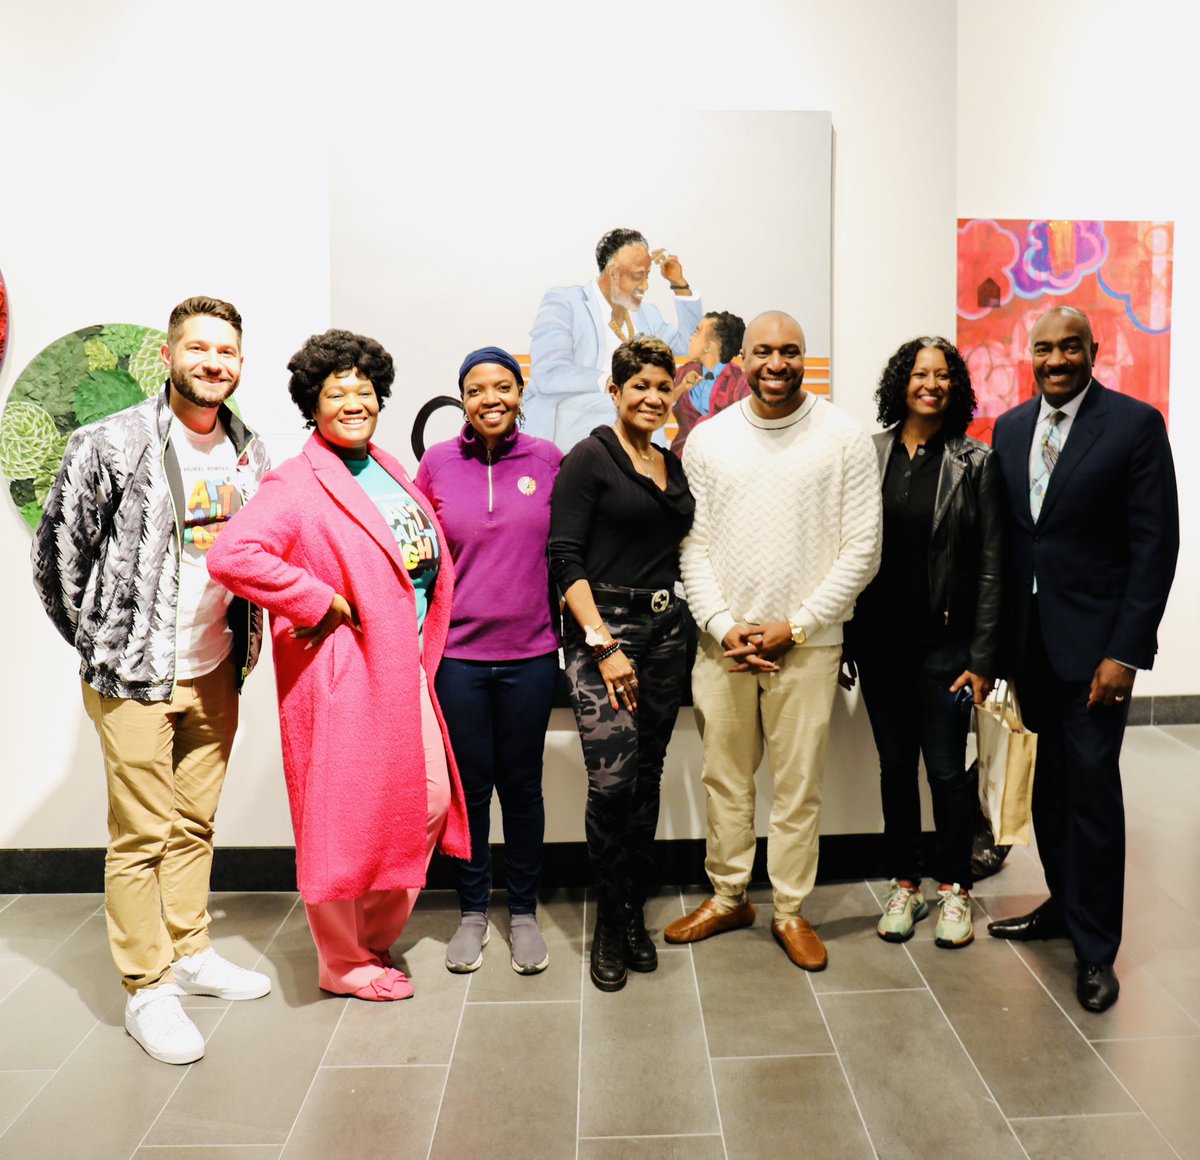 Such a pleasure to join my colleagues from @TheDCArts for @DCArtAllNight at Canal Park this past weekend! Glad to see so many members of the public pay a visit at our gallery as well as enjoy the outside activities! Thx again @CapitolRvrFront & @SmallBizDC #TheDCArts #DCisOpen